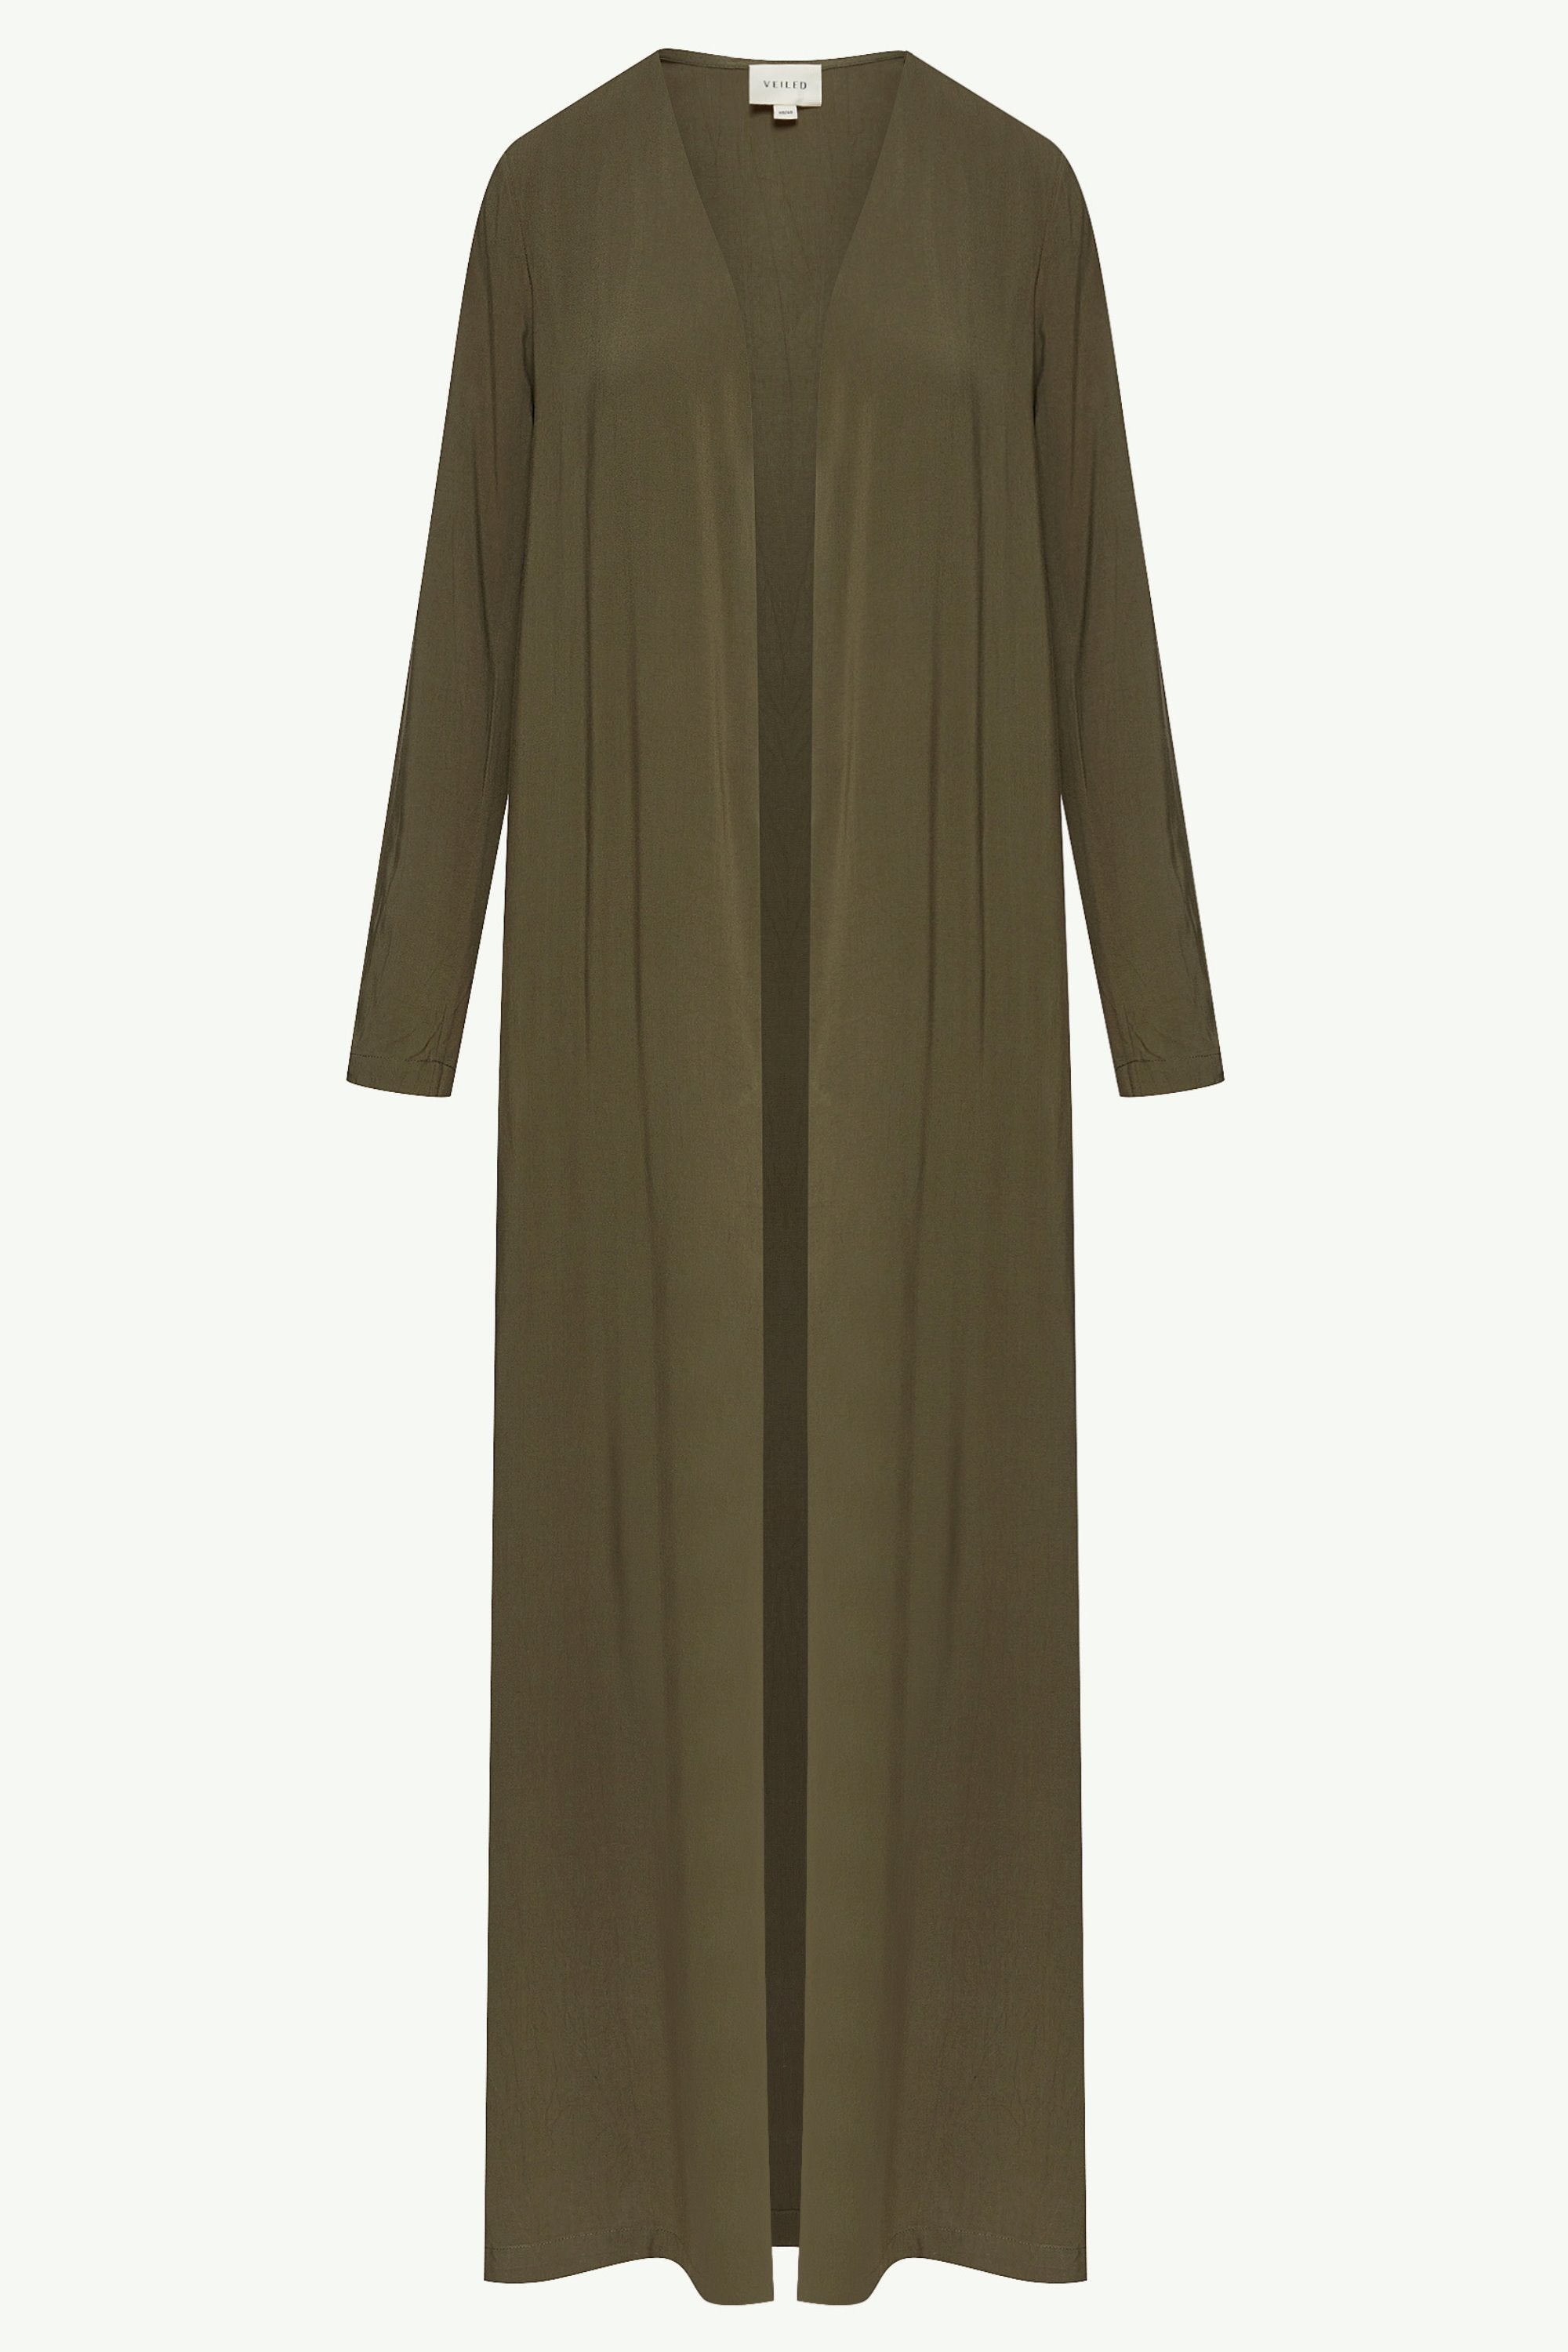 Essential Woven Open Abaya - Olive Clothing Veiled 